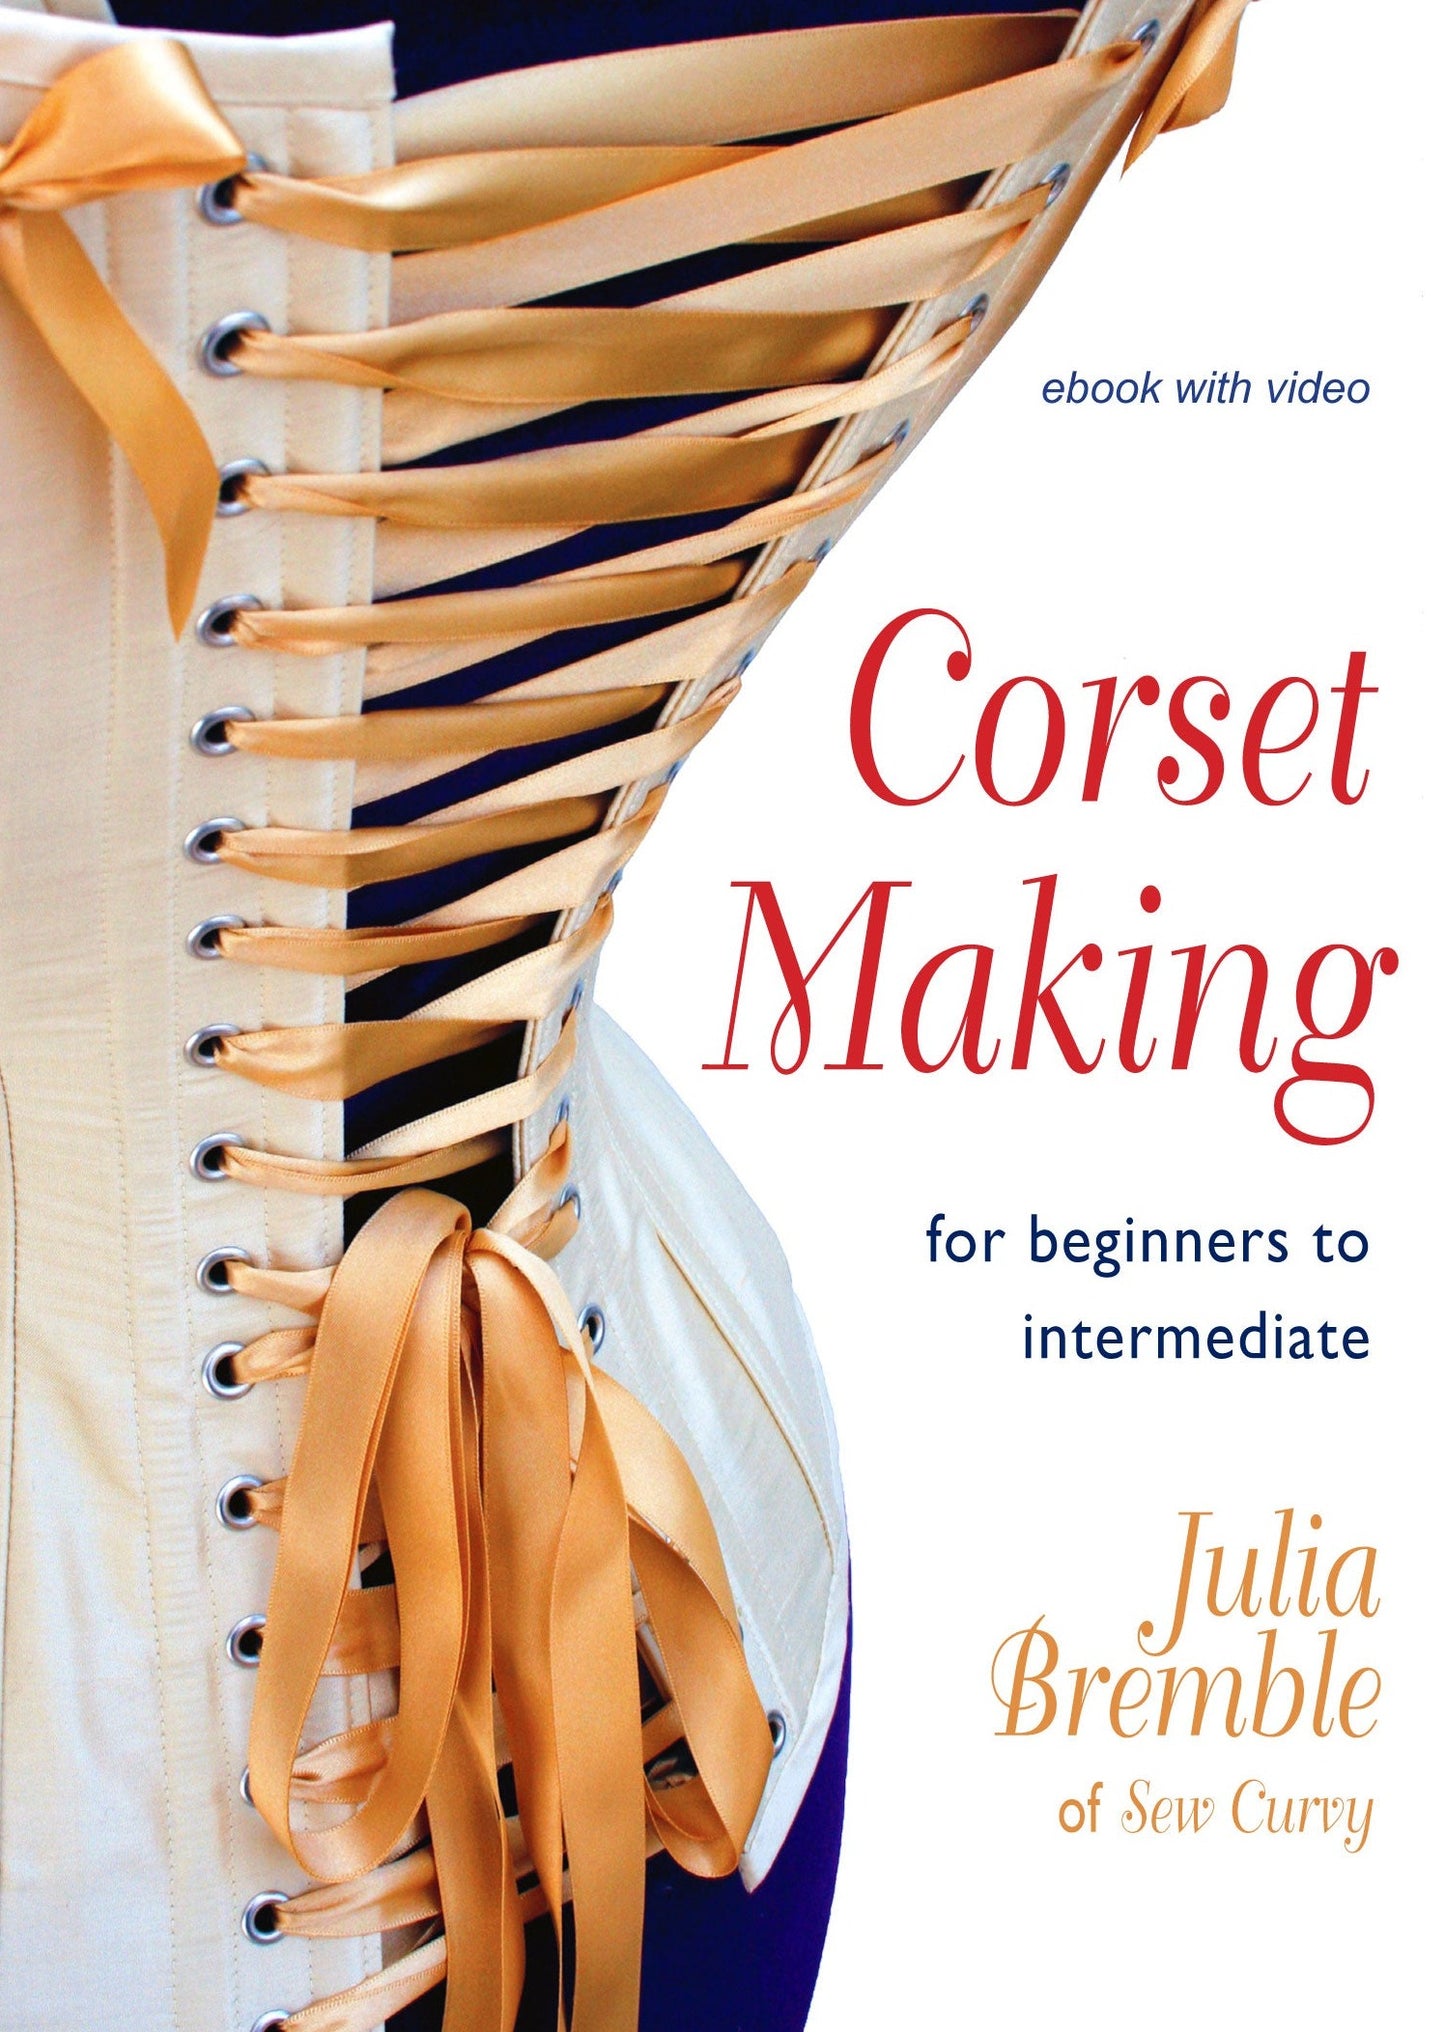 Corset Making: for beginners to intermediate, by Julia Bremble